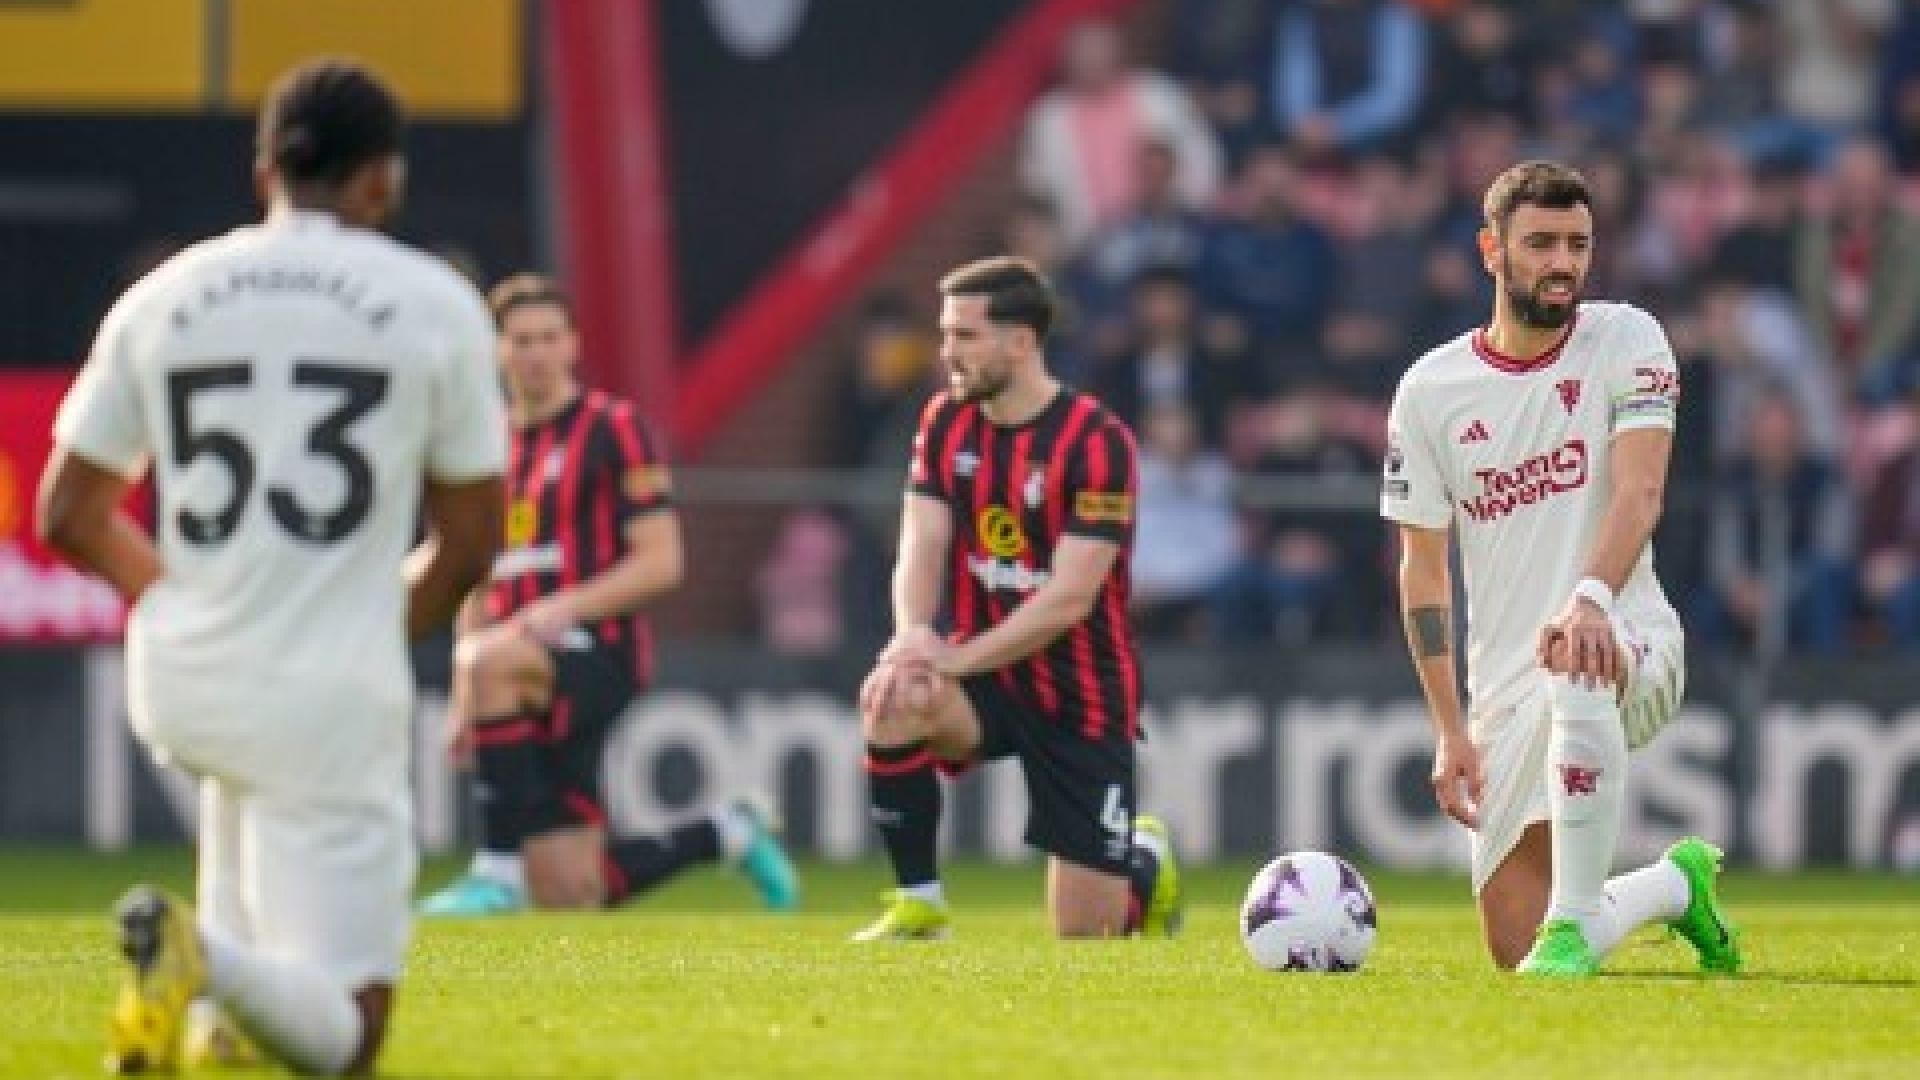 AFC Bournemouth vs Manchester United full match replay and highlights